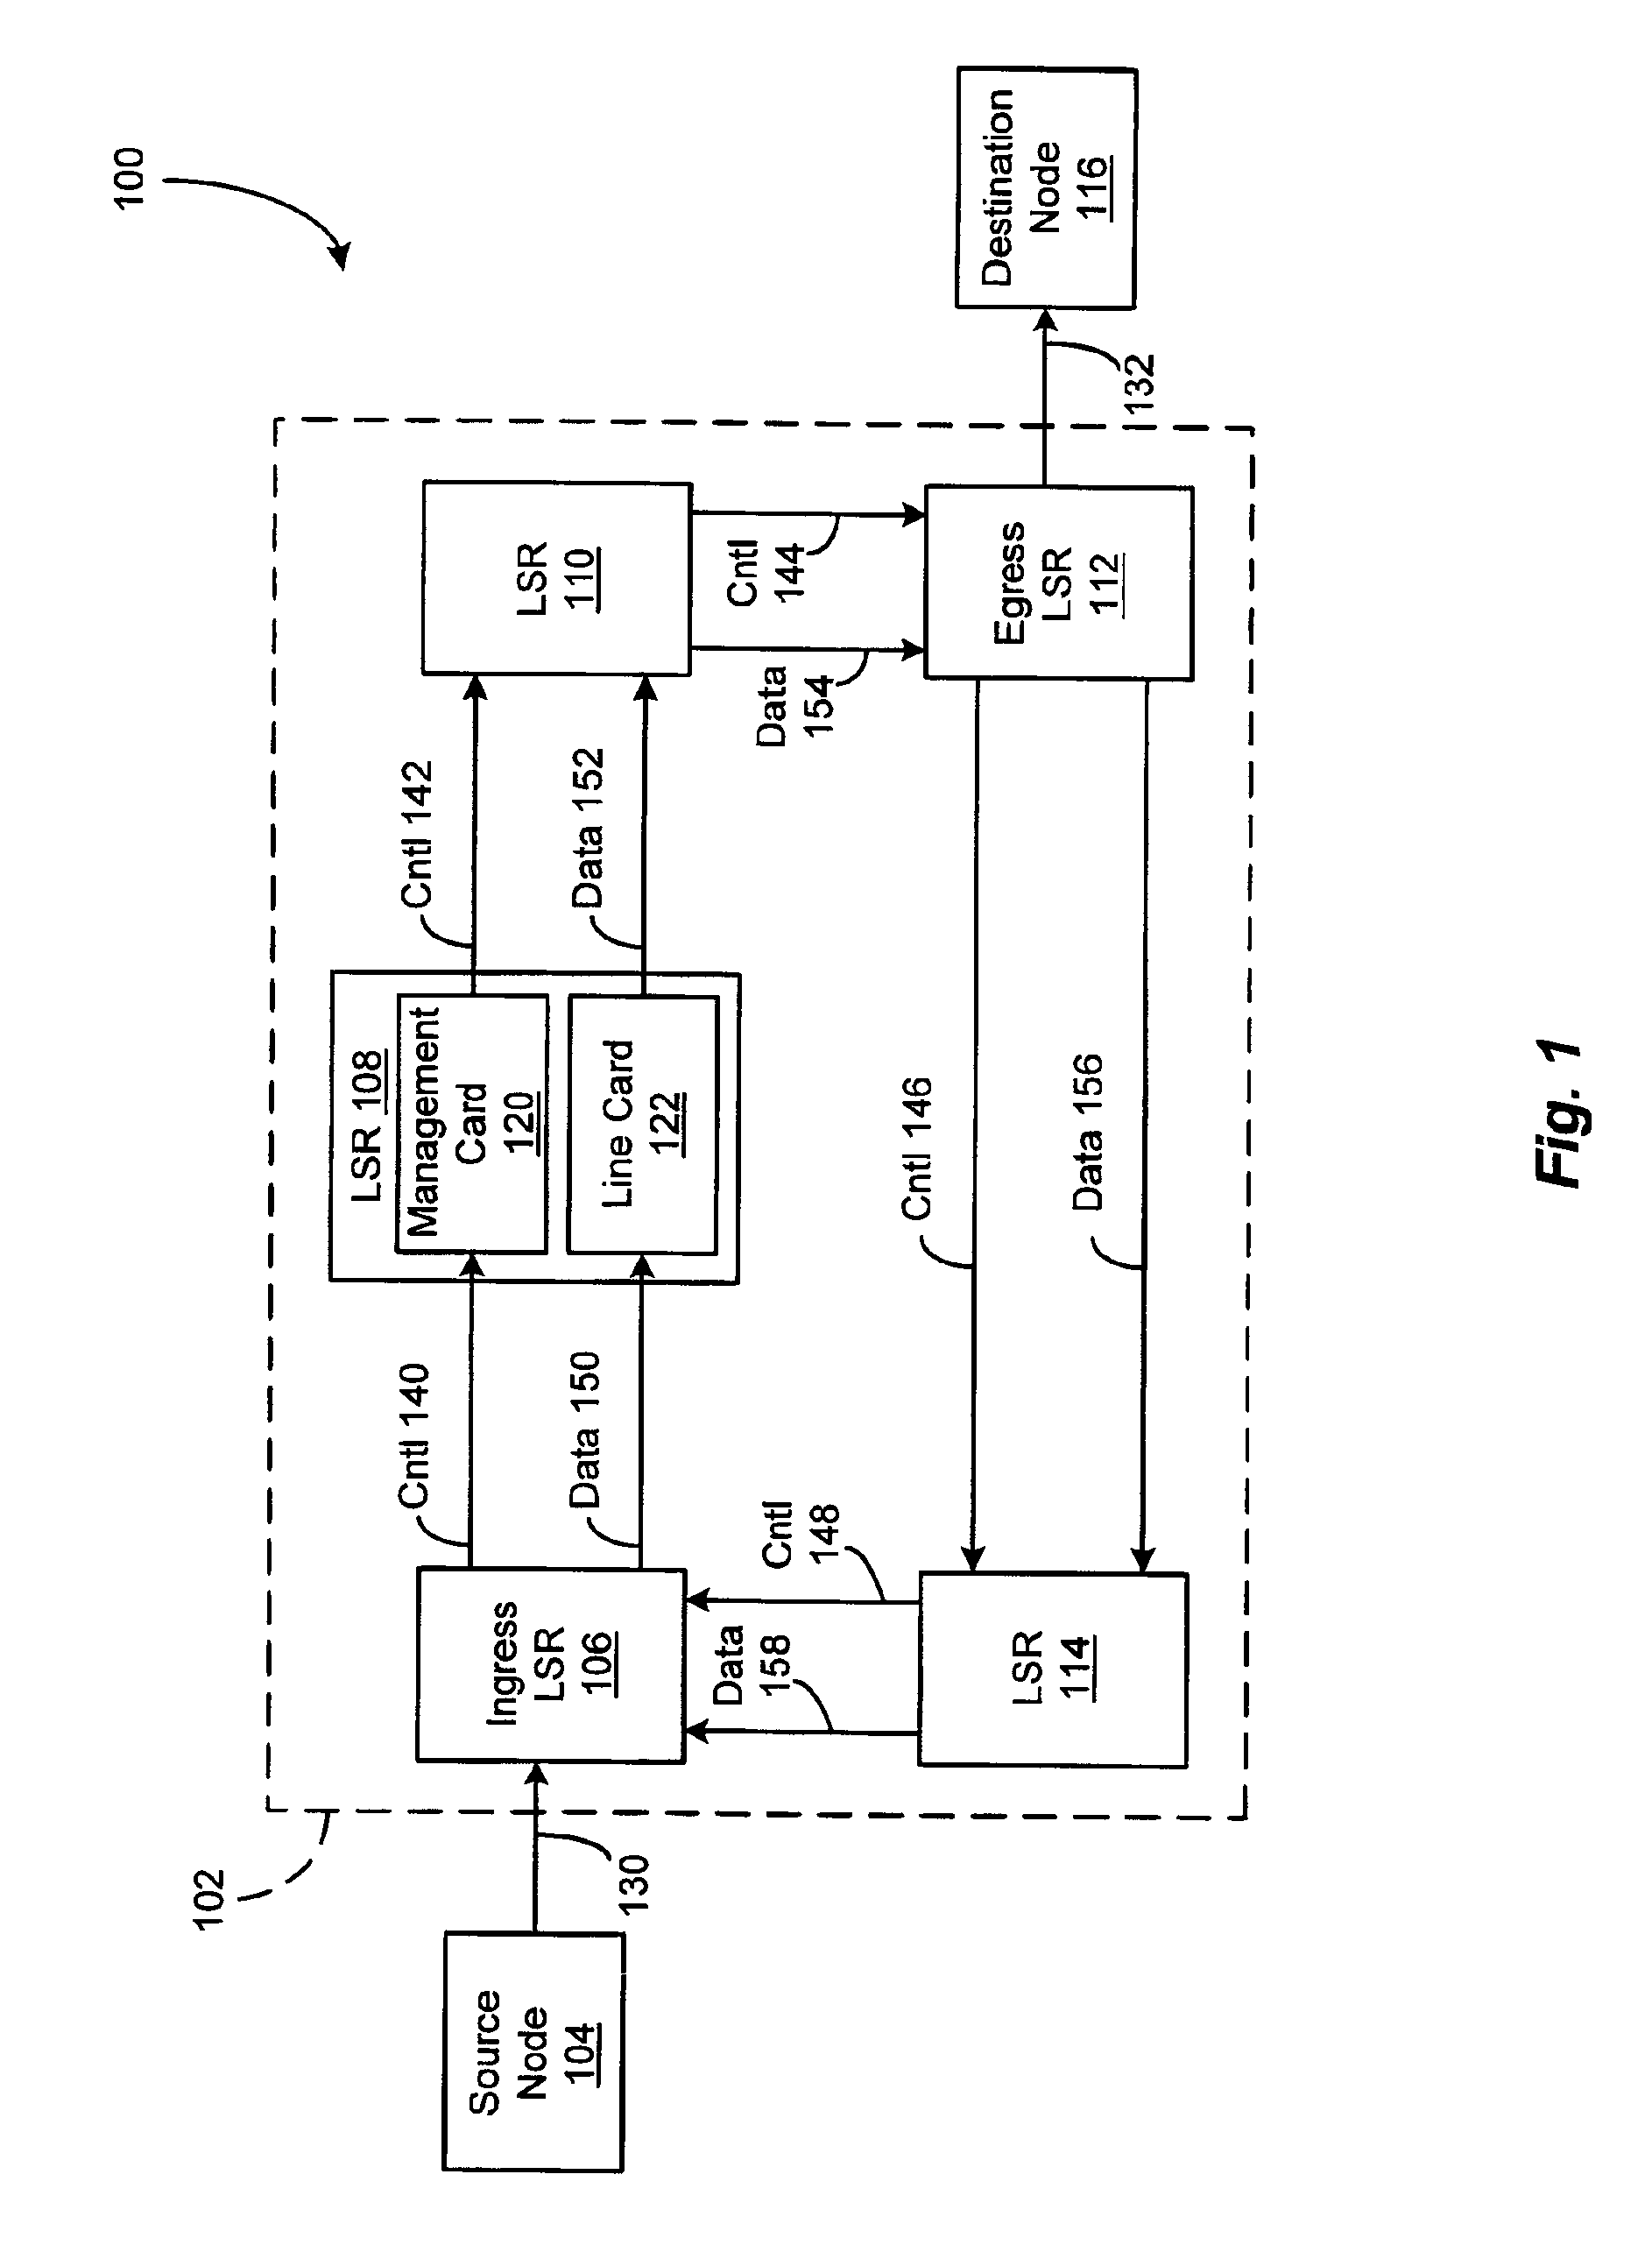 Circuit reestablishment and tear down in a highly available communications system